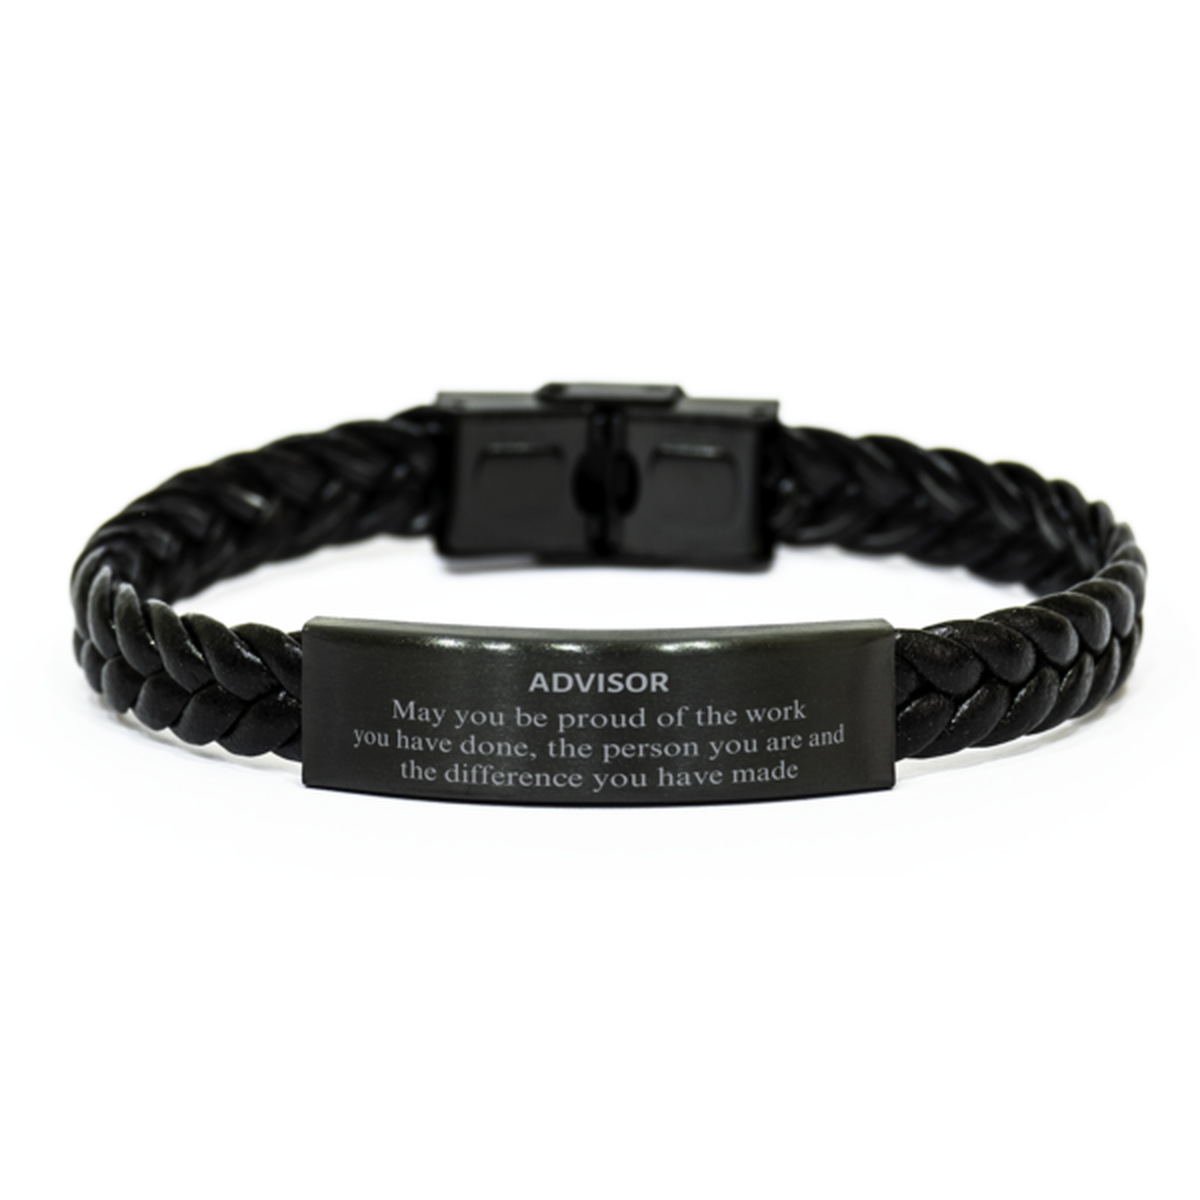 Advisor May you be proud of the work you have done, Retirement Advisor Braided Leather Bracelet for Colleague Appreciation Gifts Amazing for Advisor